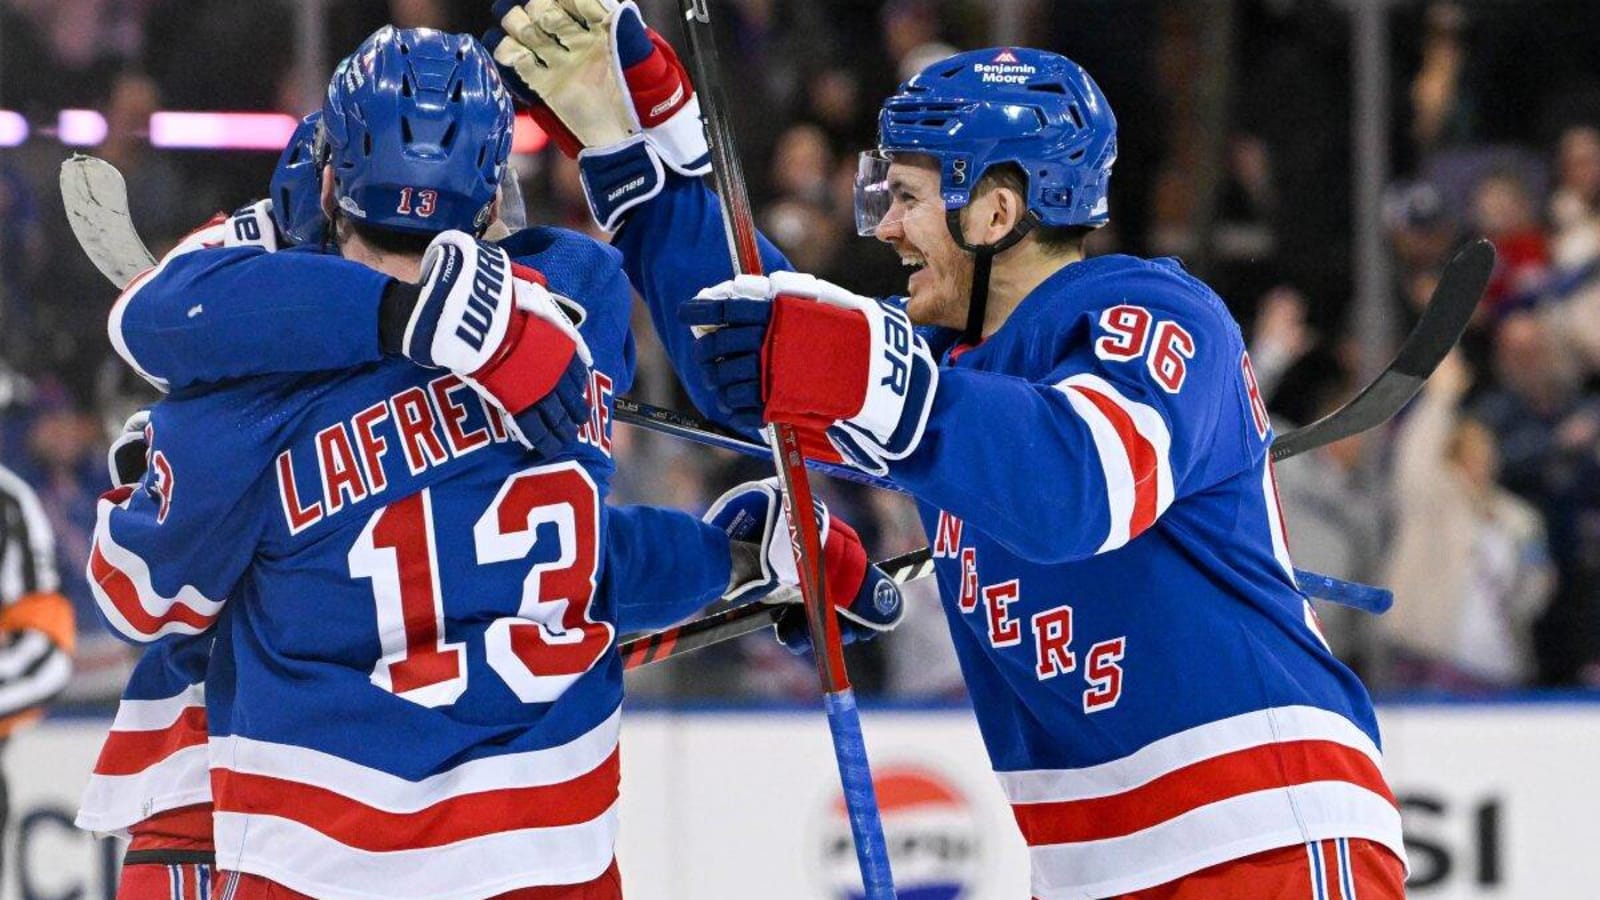 Will the Presidents’ Trophy curse strike the New York Rangers?